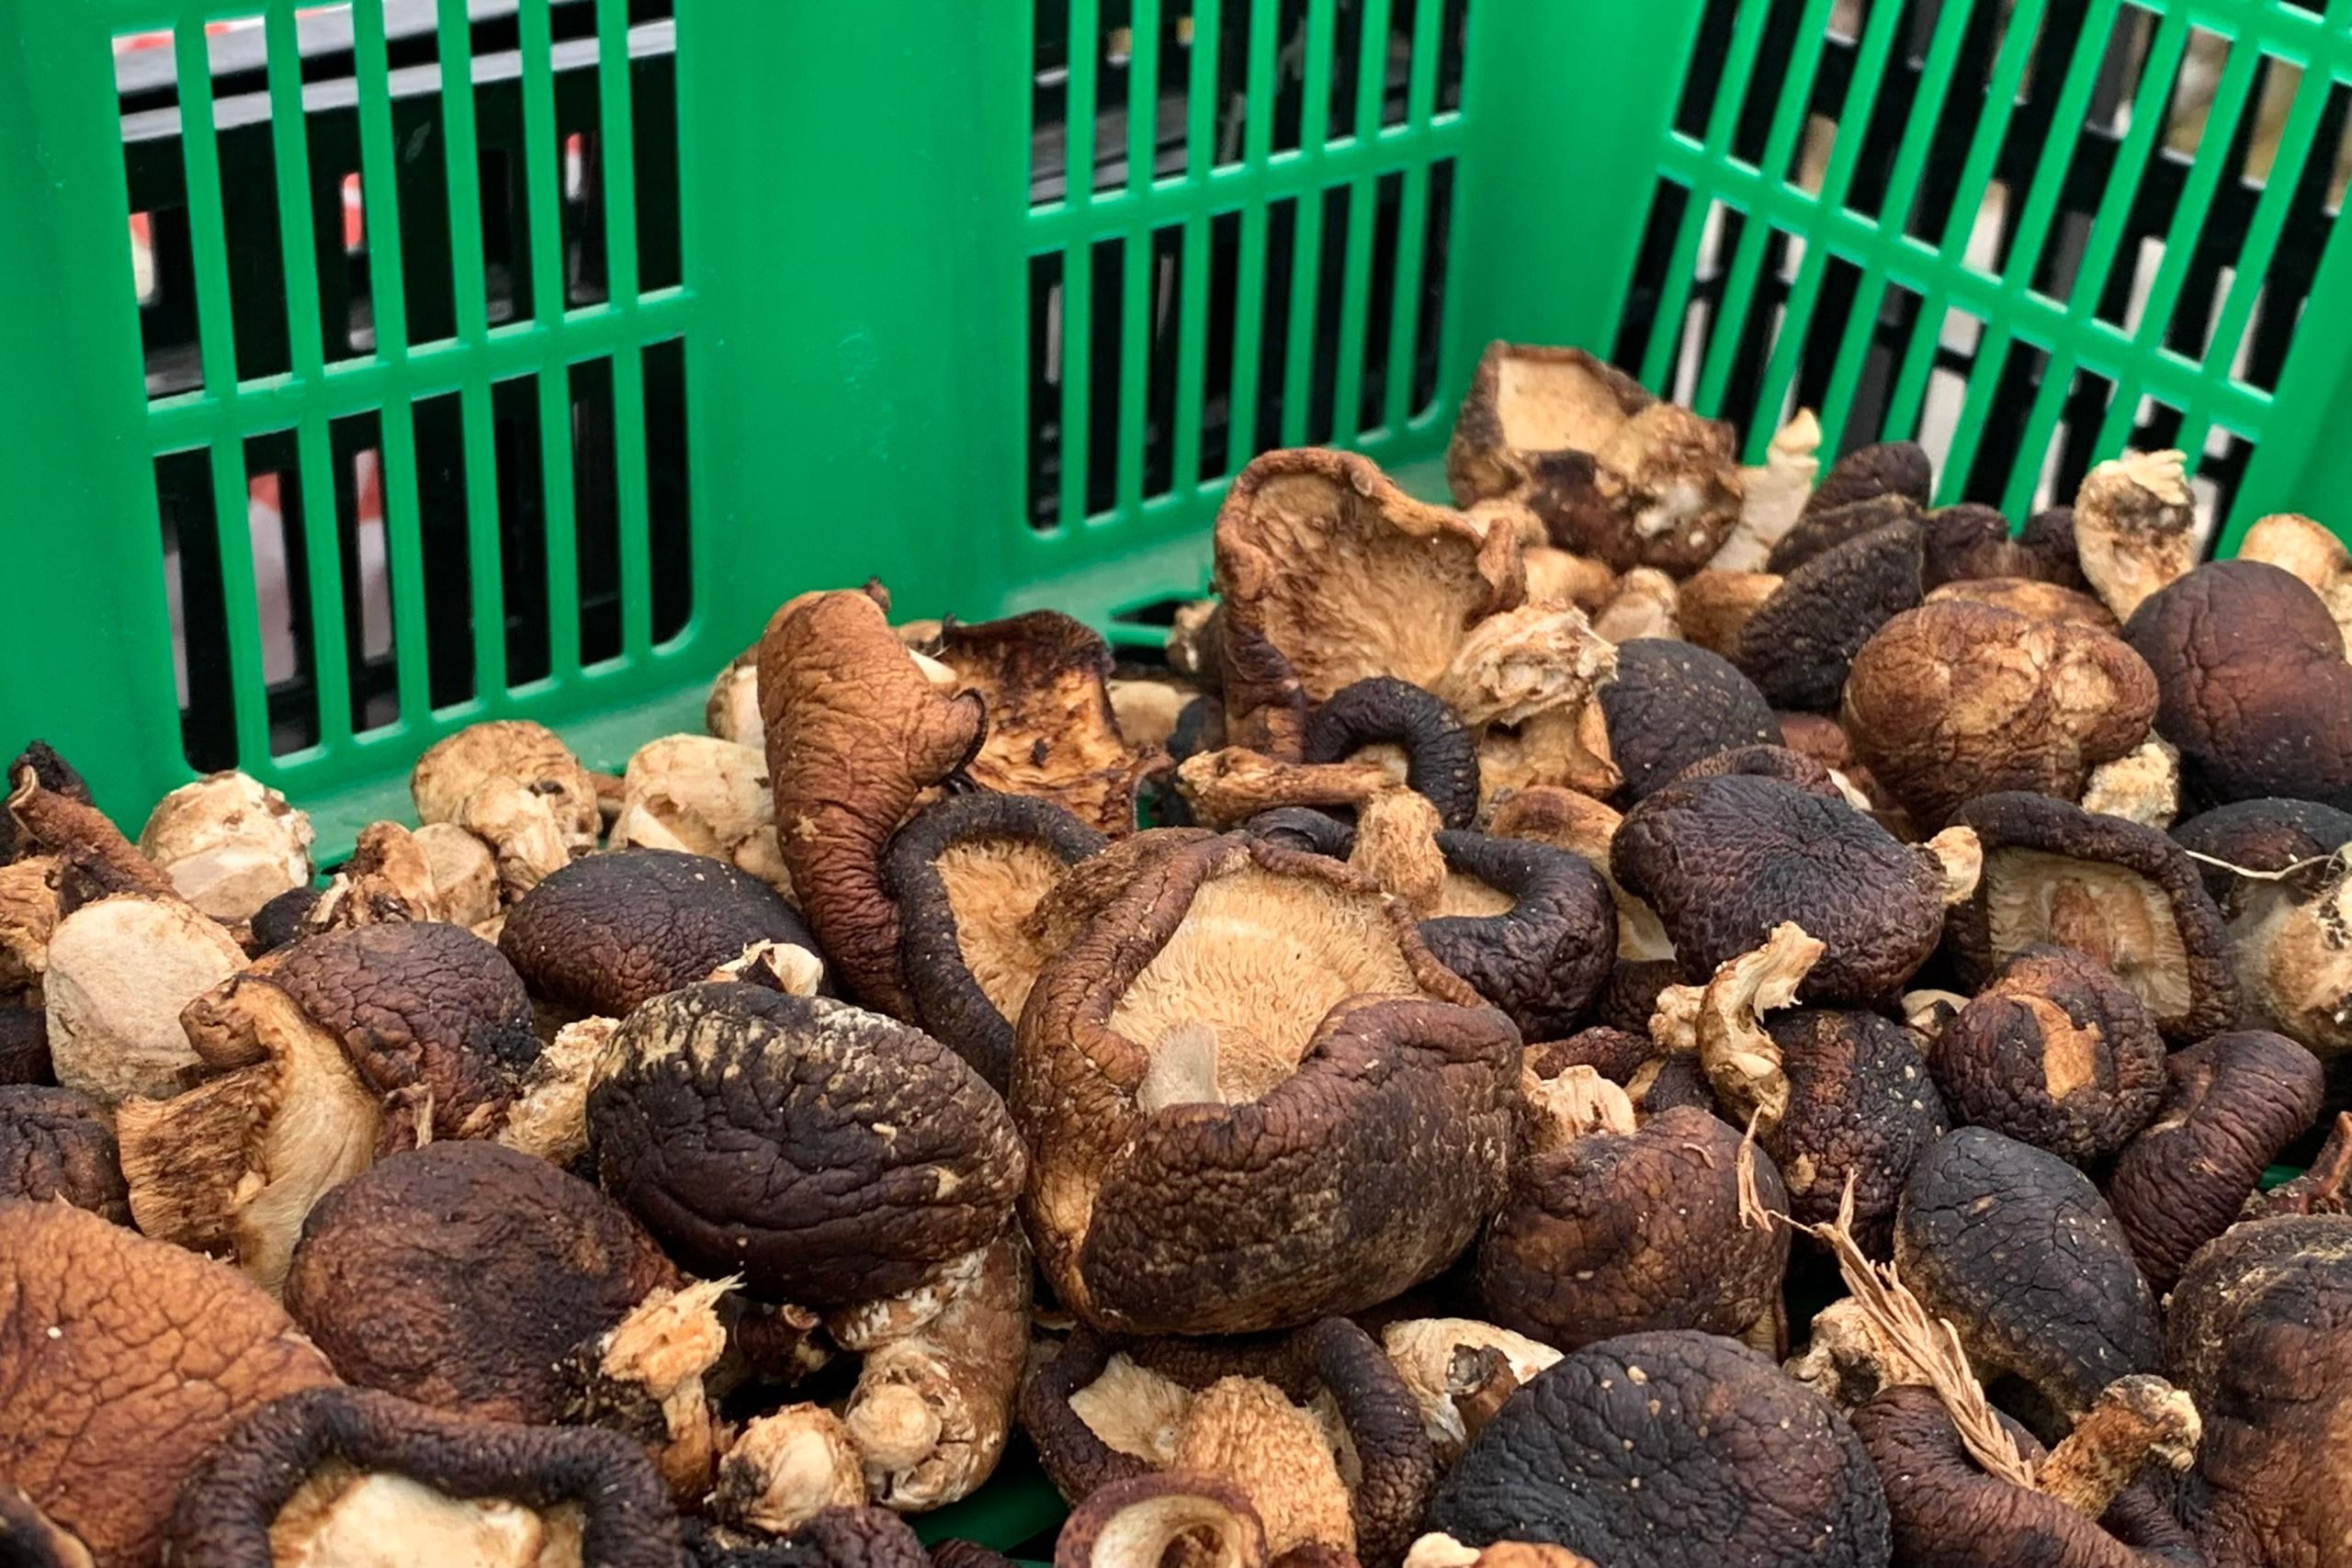 A green plastic basket filled with dried shiitake mushrooms.